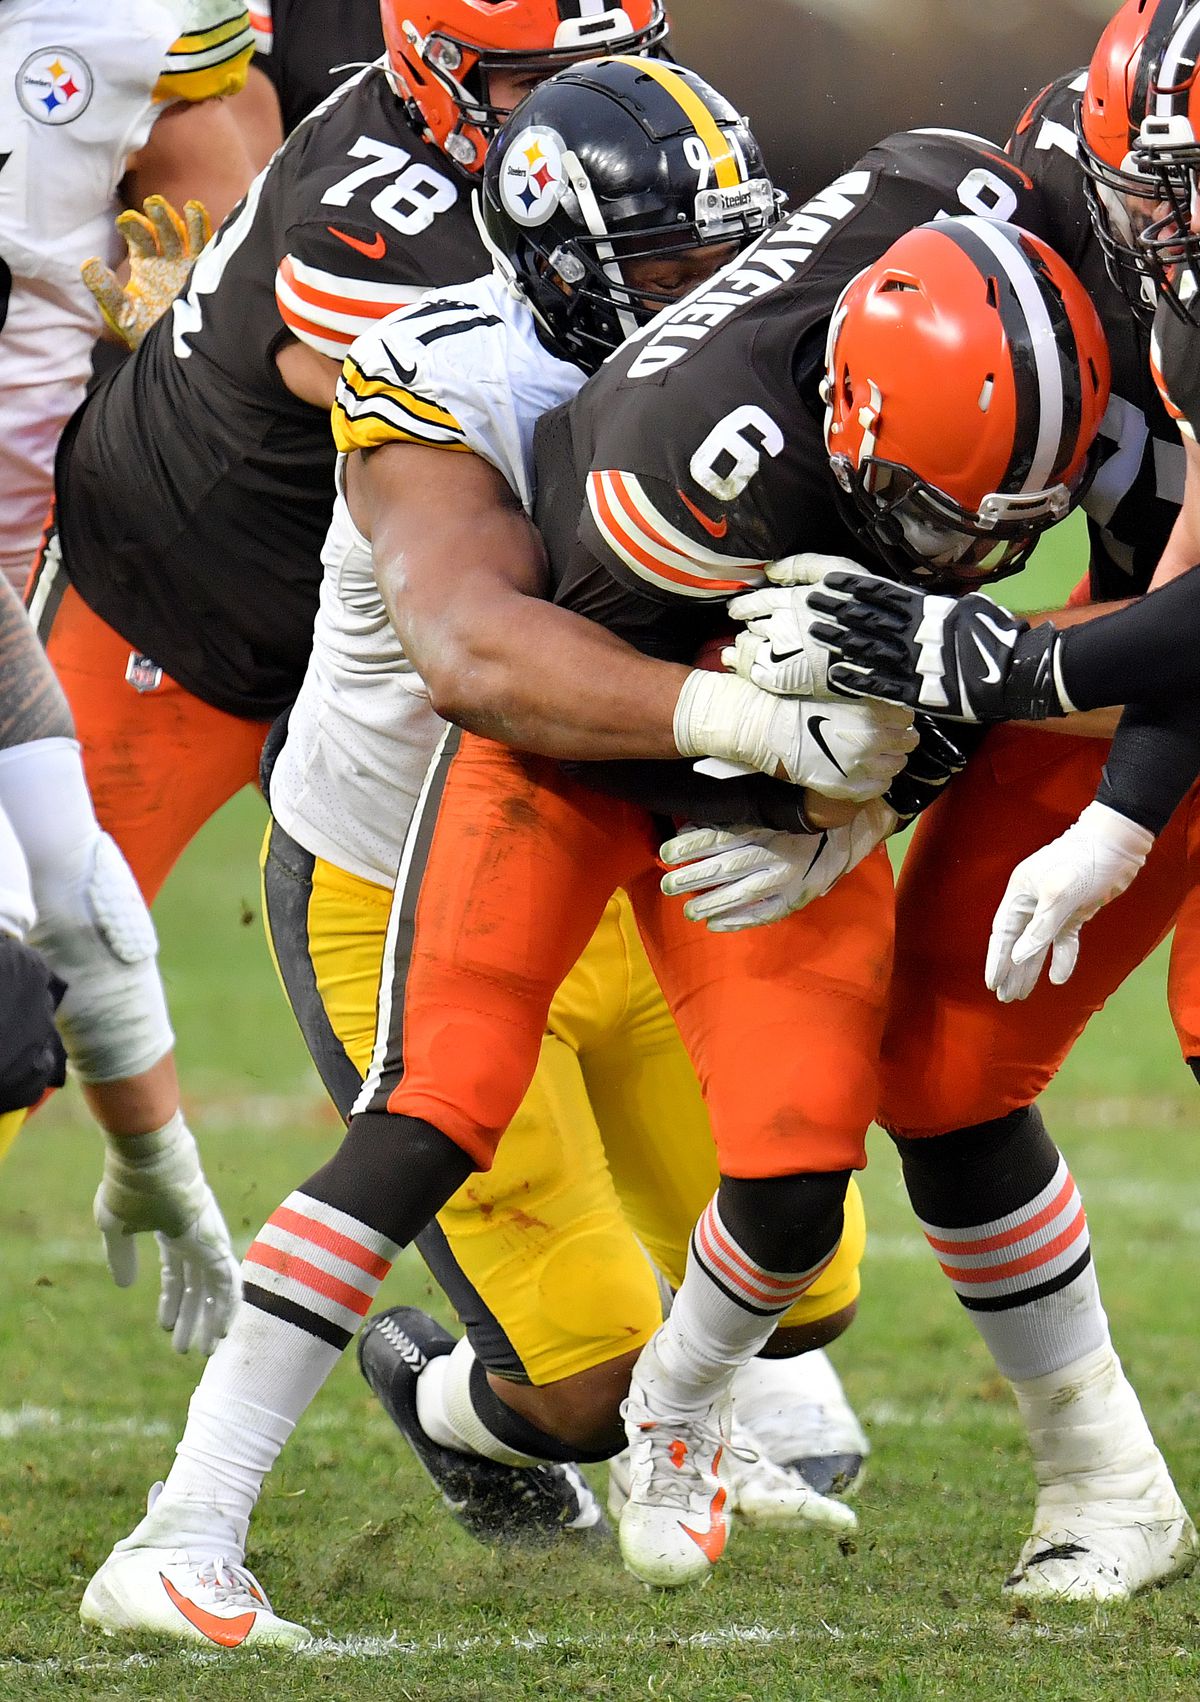 Pittsburgh Steelers v Cleveland Browns